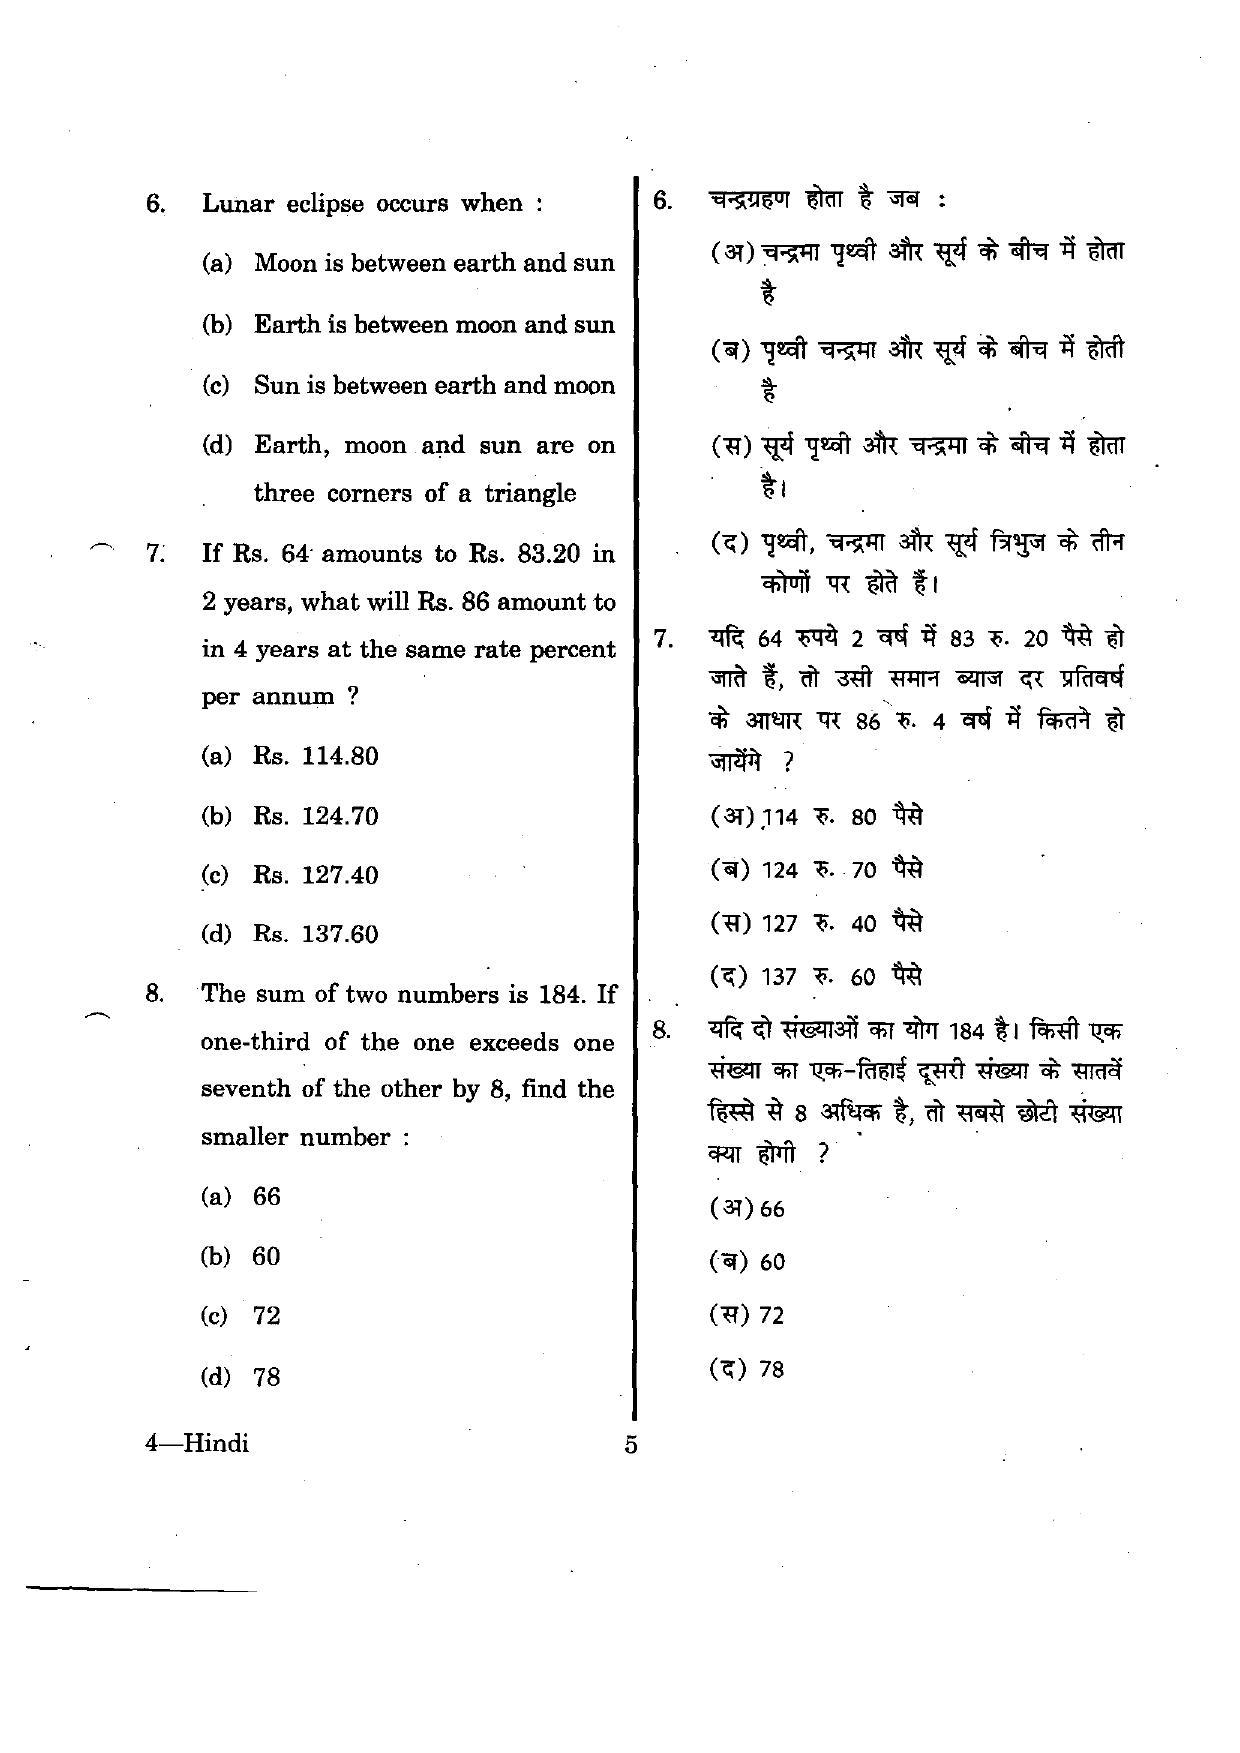 URATPG Hindi 2012 Question Paper - Page 5